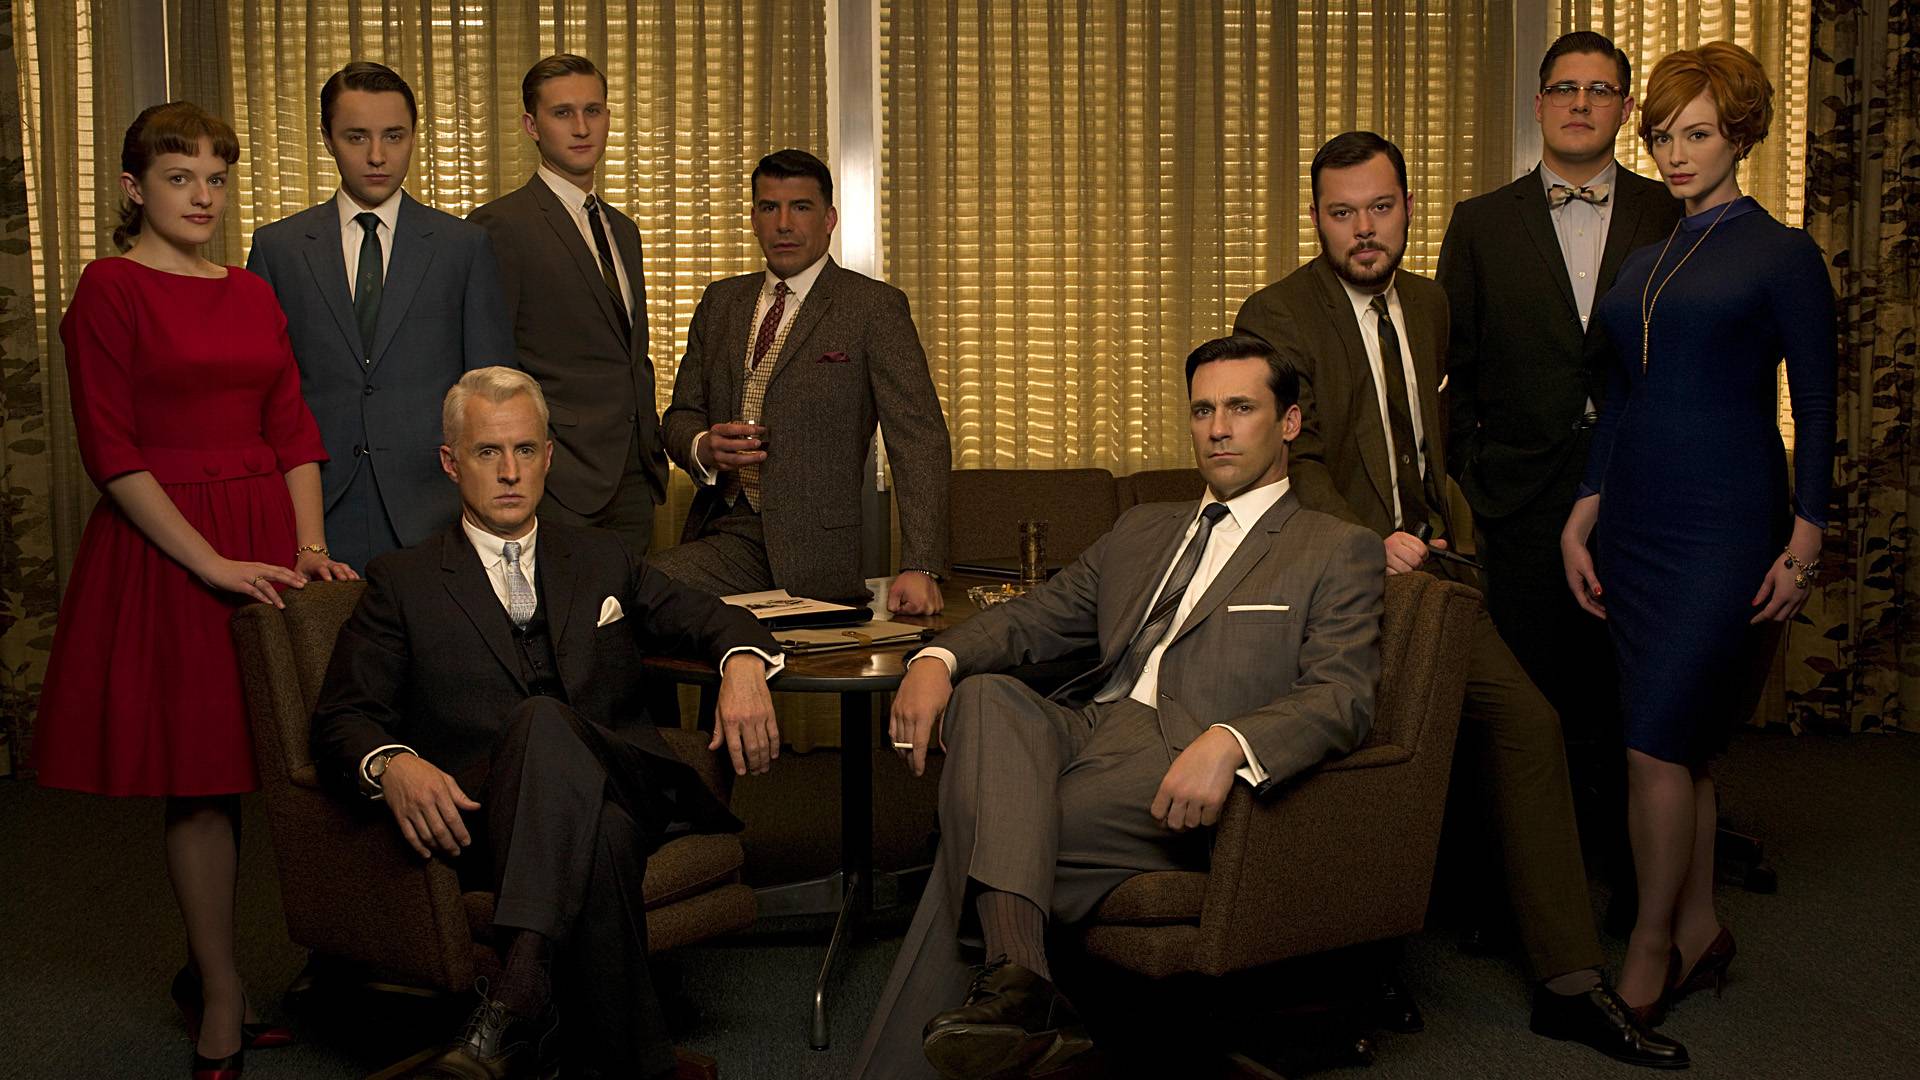 These 10 Films Most Influenced Mad Men, According to Series Creator Matthew Weiner